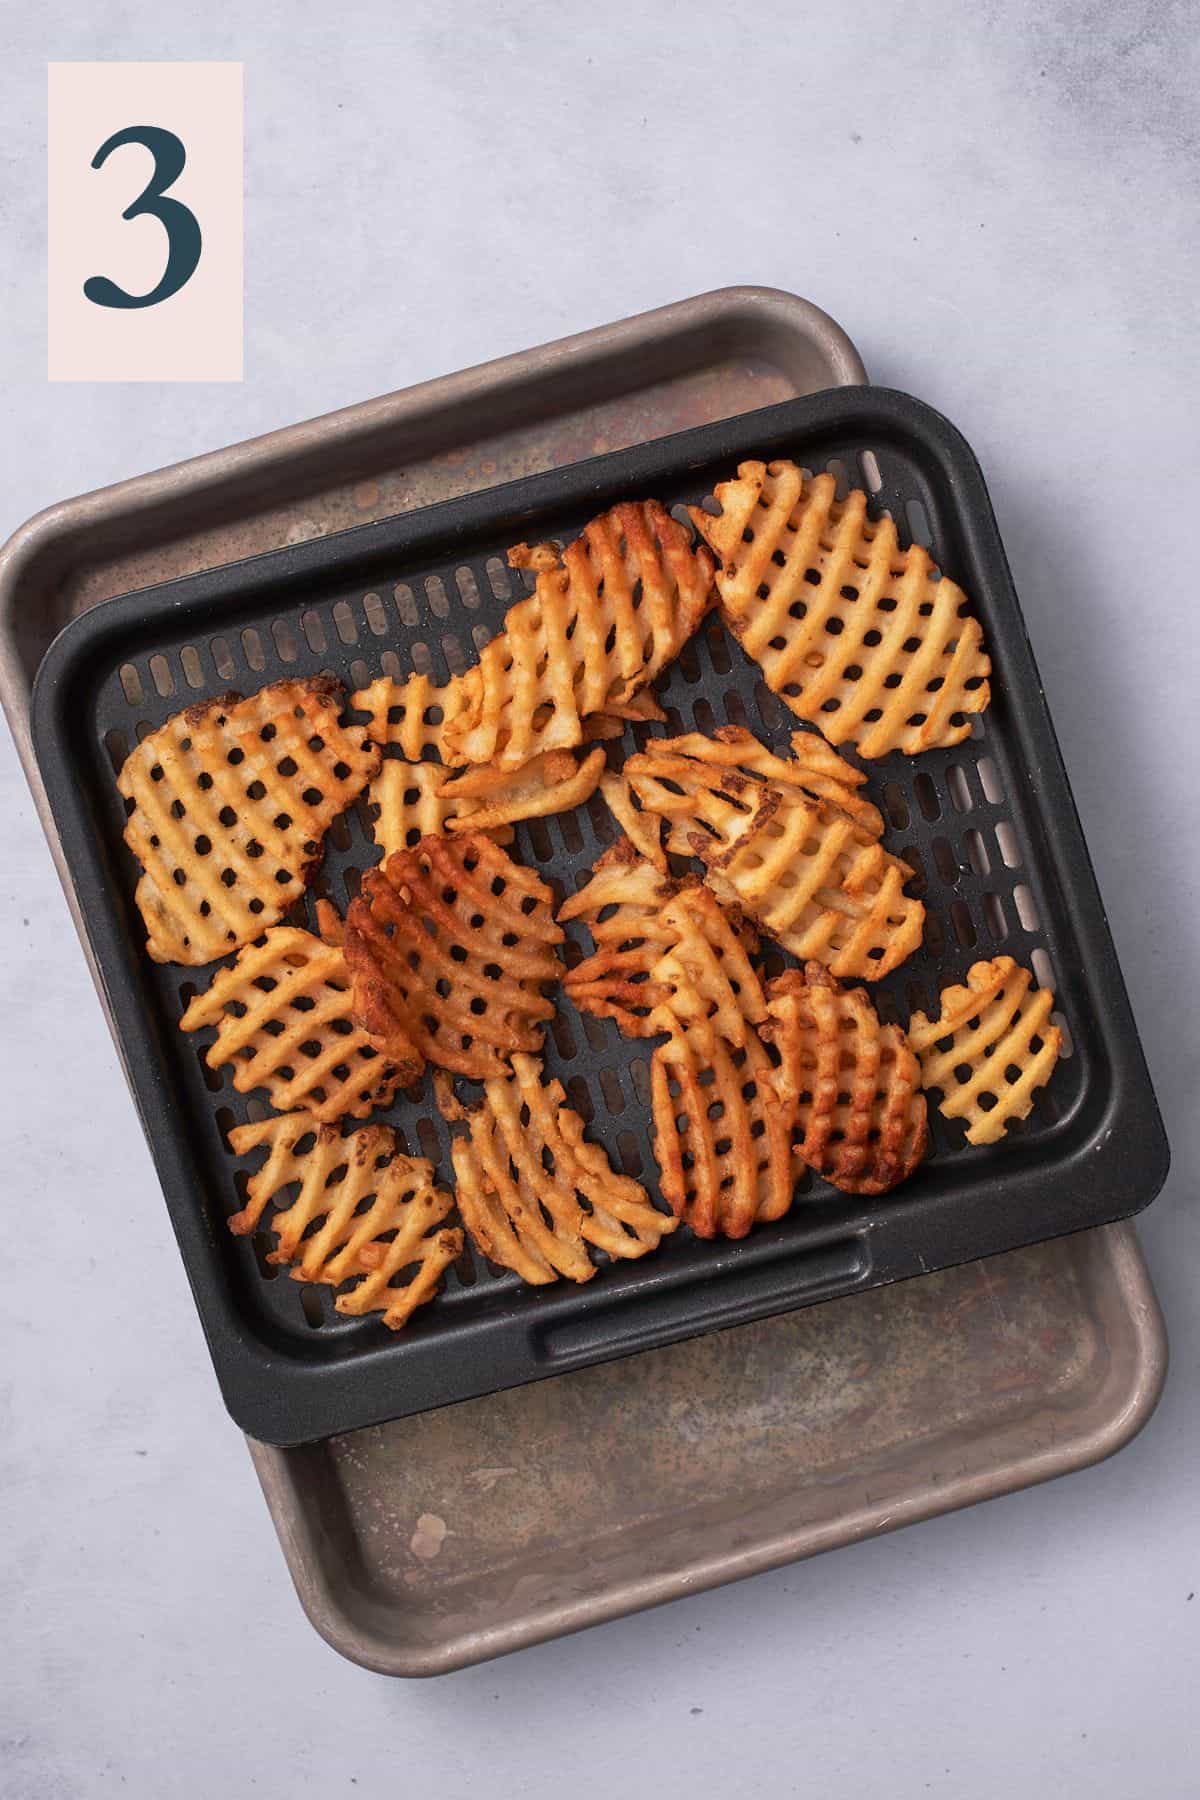 Fully cooked waffle fries that are golden brown.